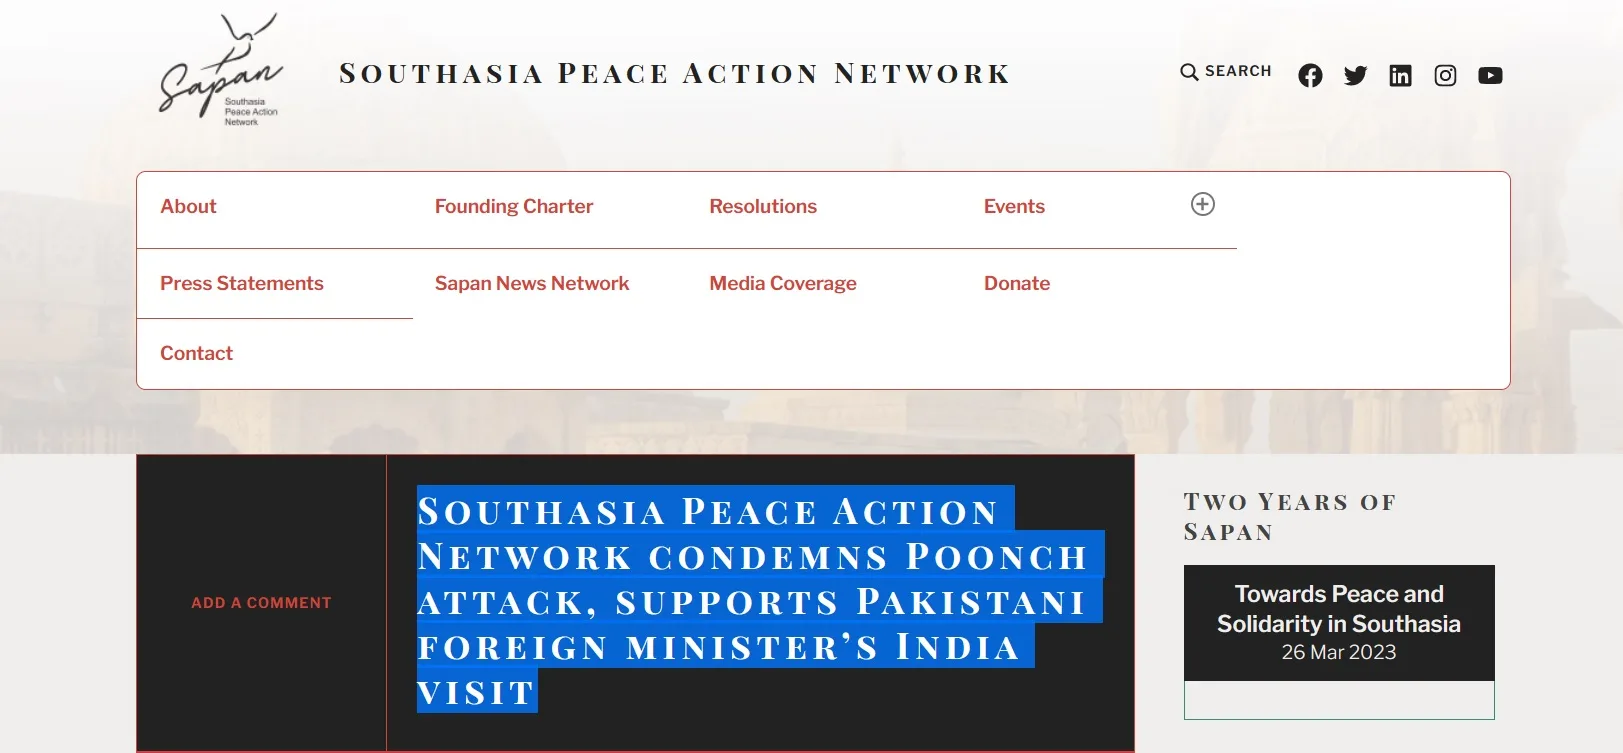 Southasia Peace Action Network supports Pakistani foreign minister’s India visit and condemns Poonch attack